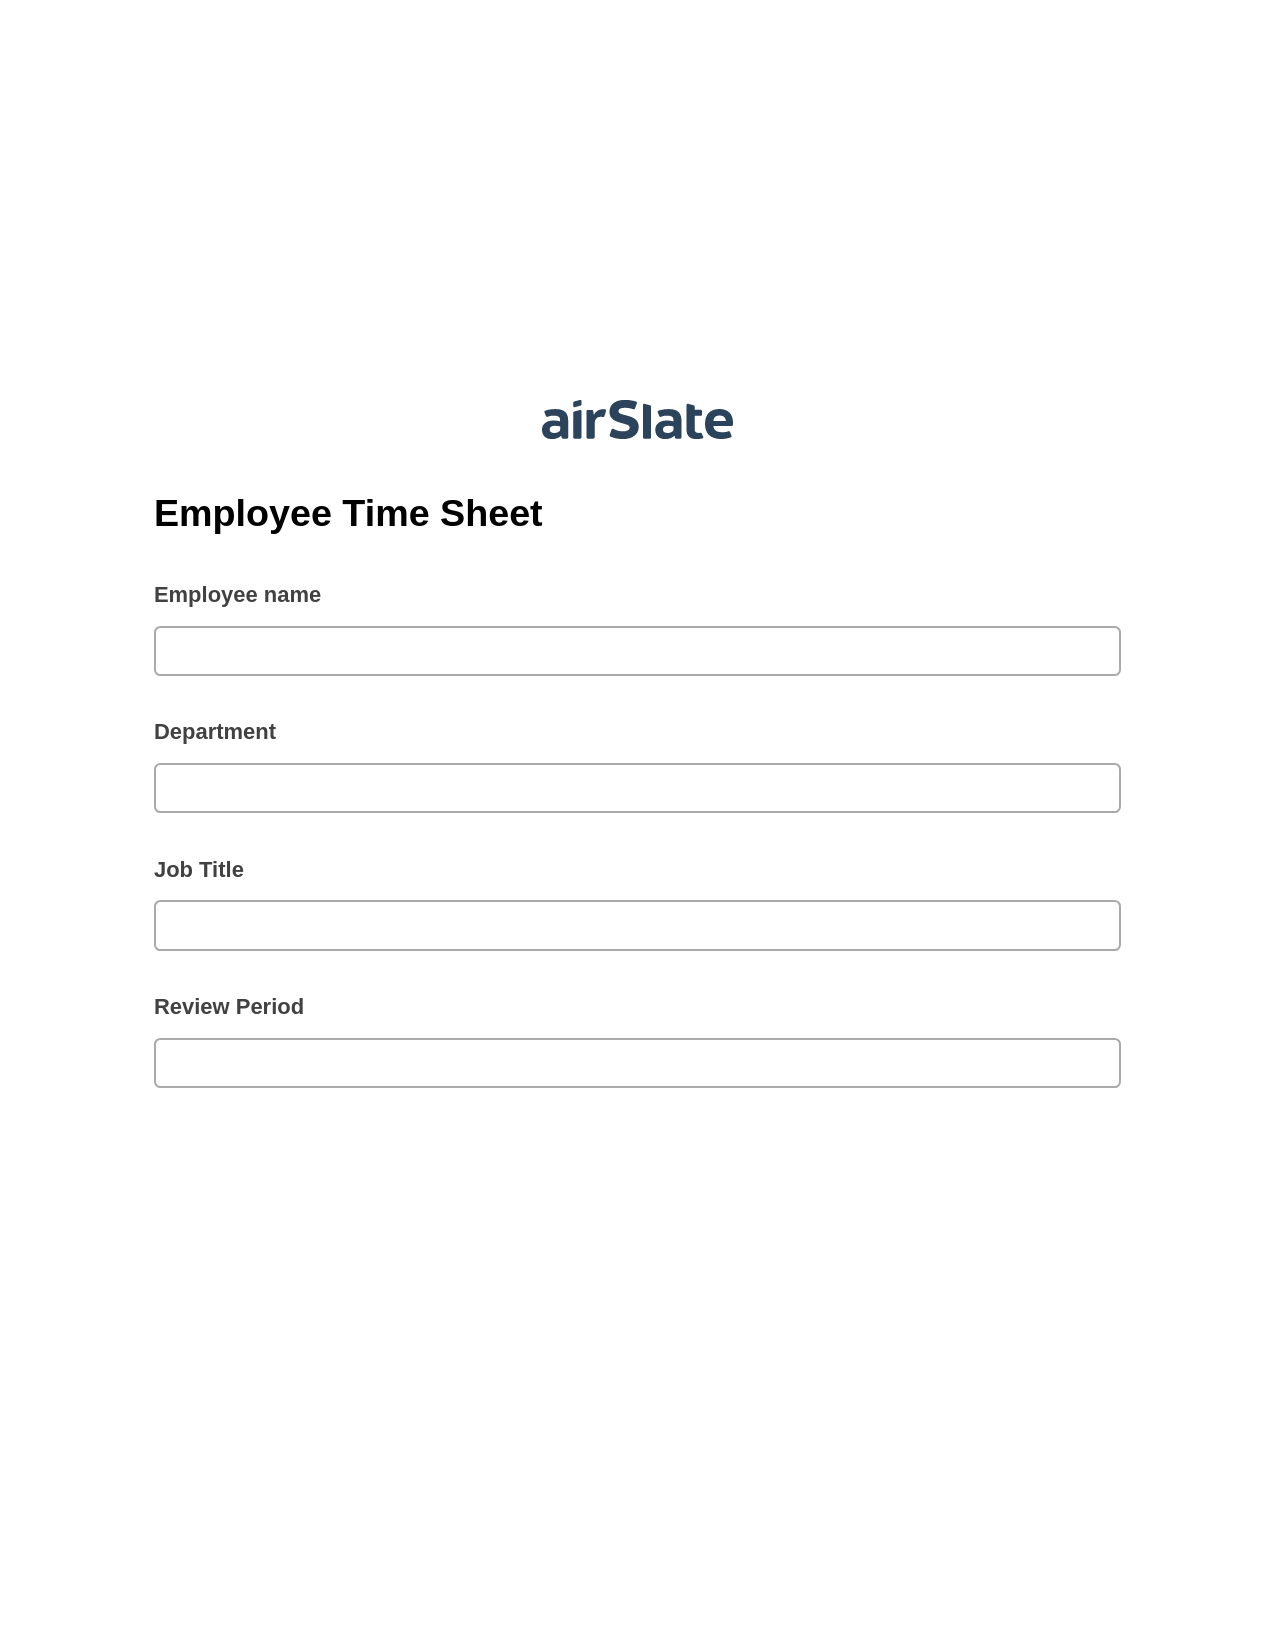 Multirole Employee Time Sheet Pre-fill Dropdowns from Excel Bot, Create slate addon, Export to Excel 365 Bot